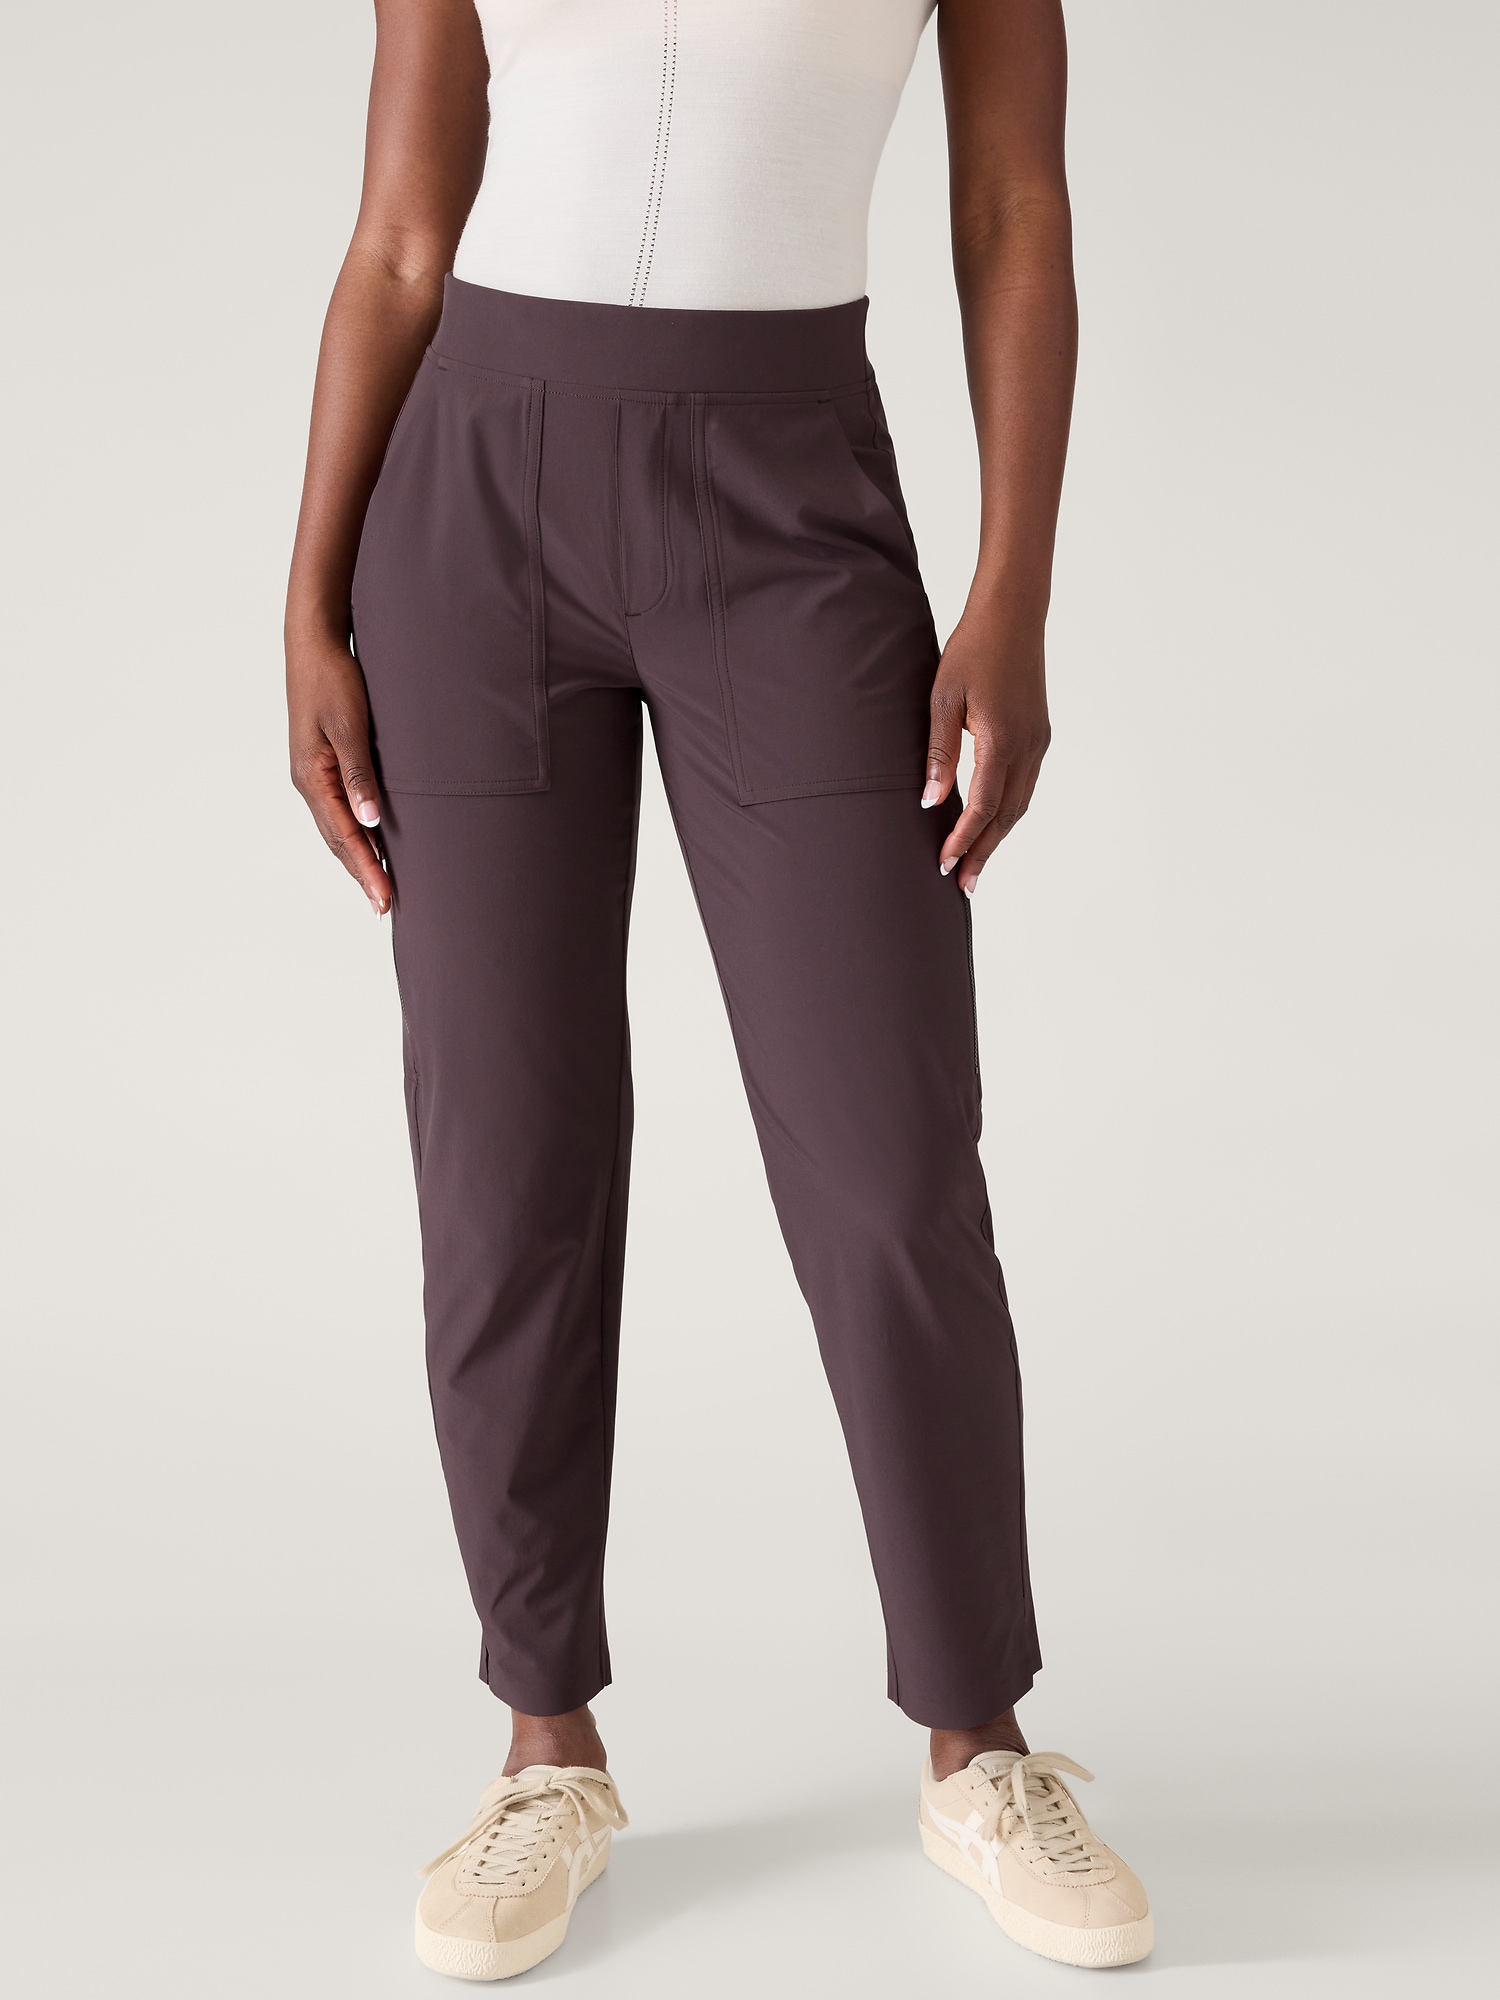 ATHLETA on X: Introducing the new Brooklyn Ankle Pant: Recycled